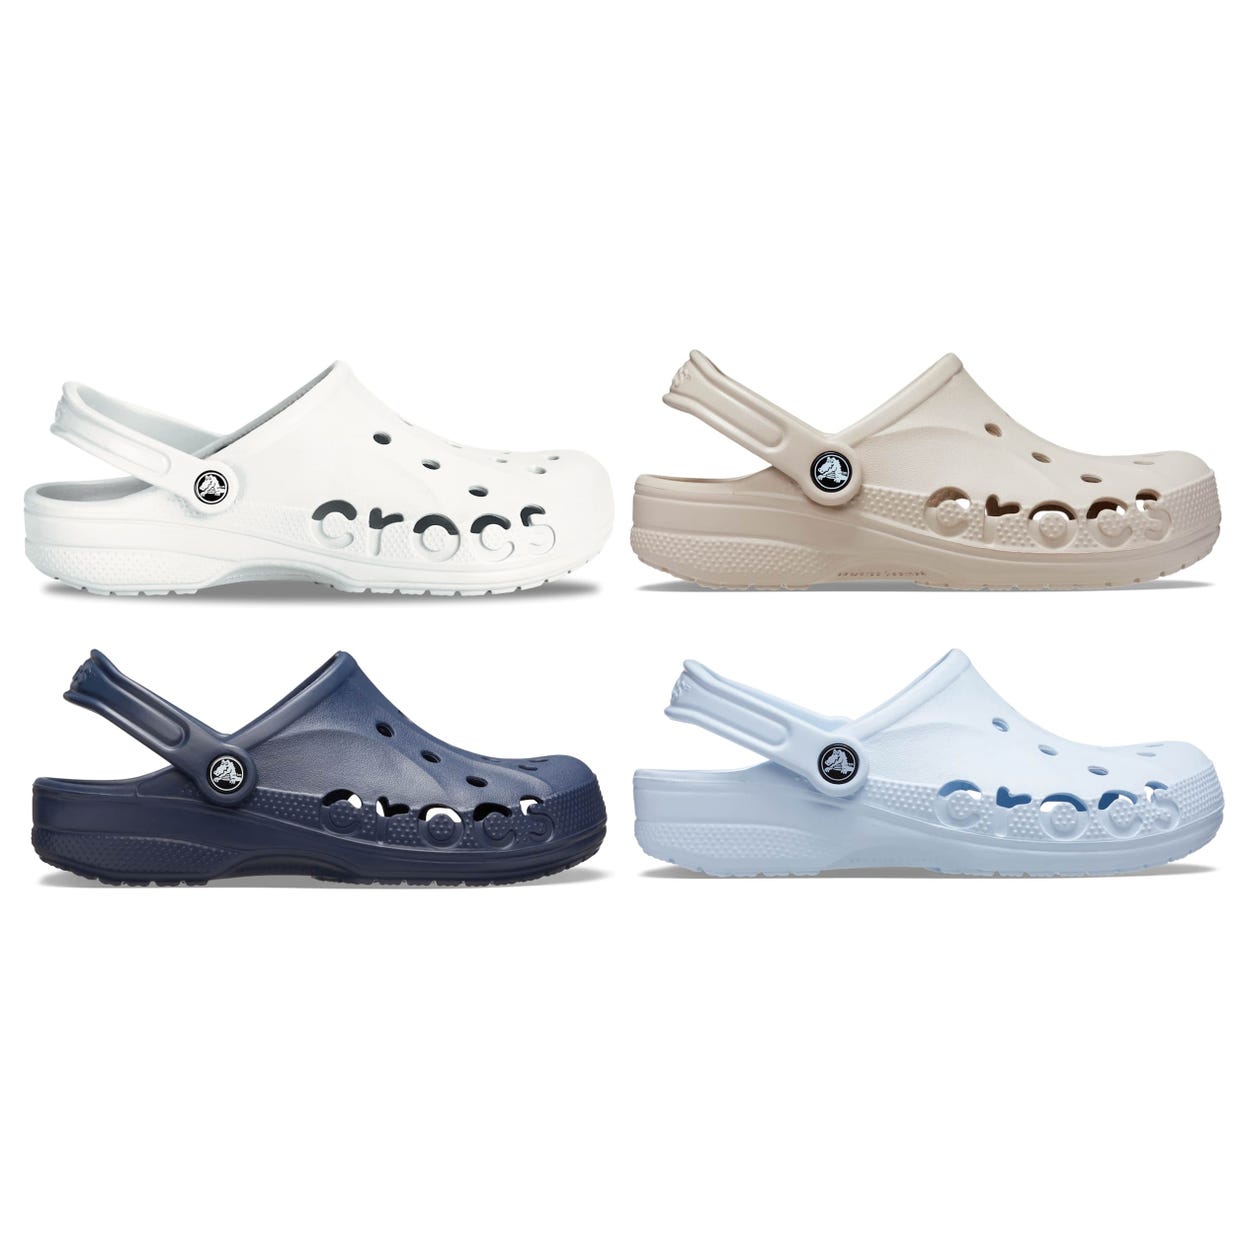 Four pairs of Crocs clogs in different colors: white, beige, navy, and light blue.